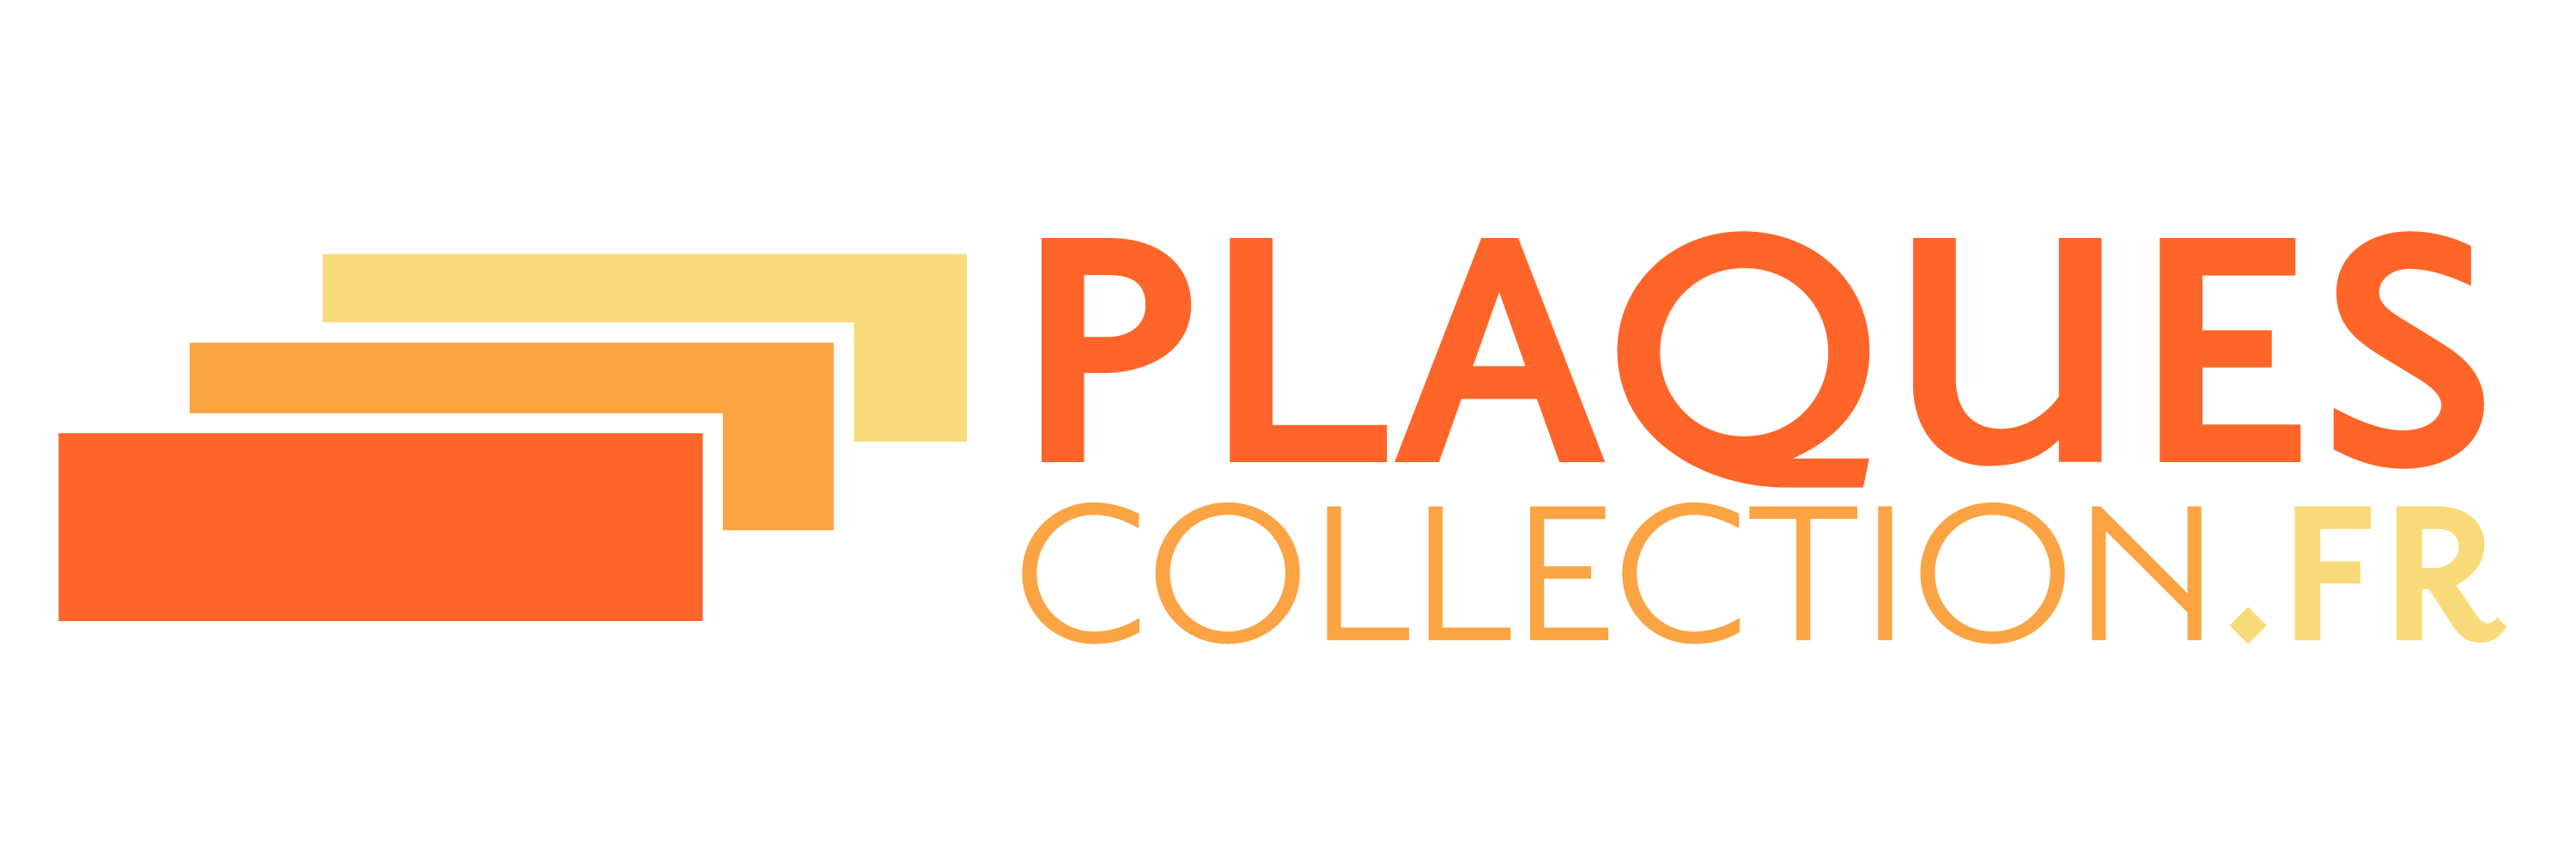 plaquescollection.fr